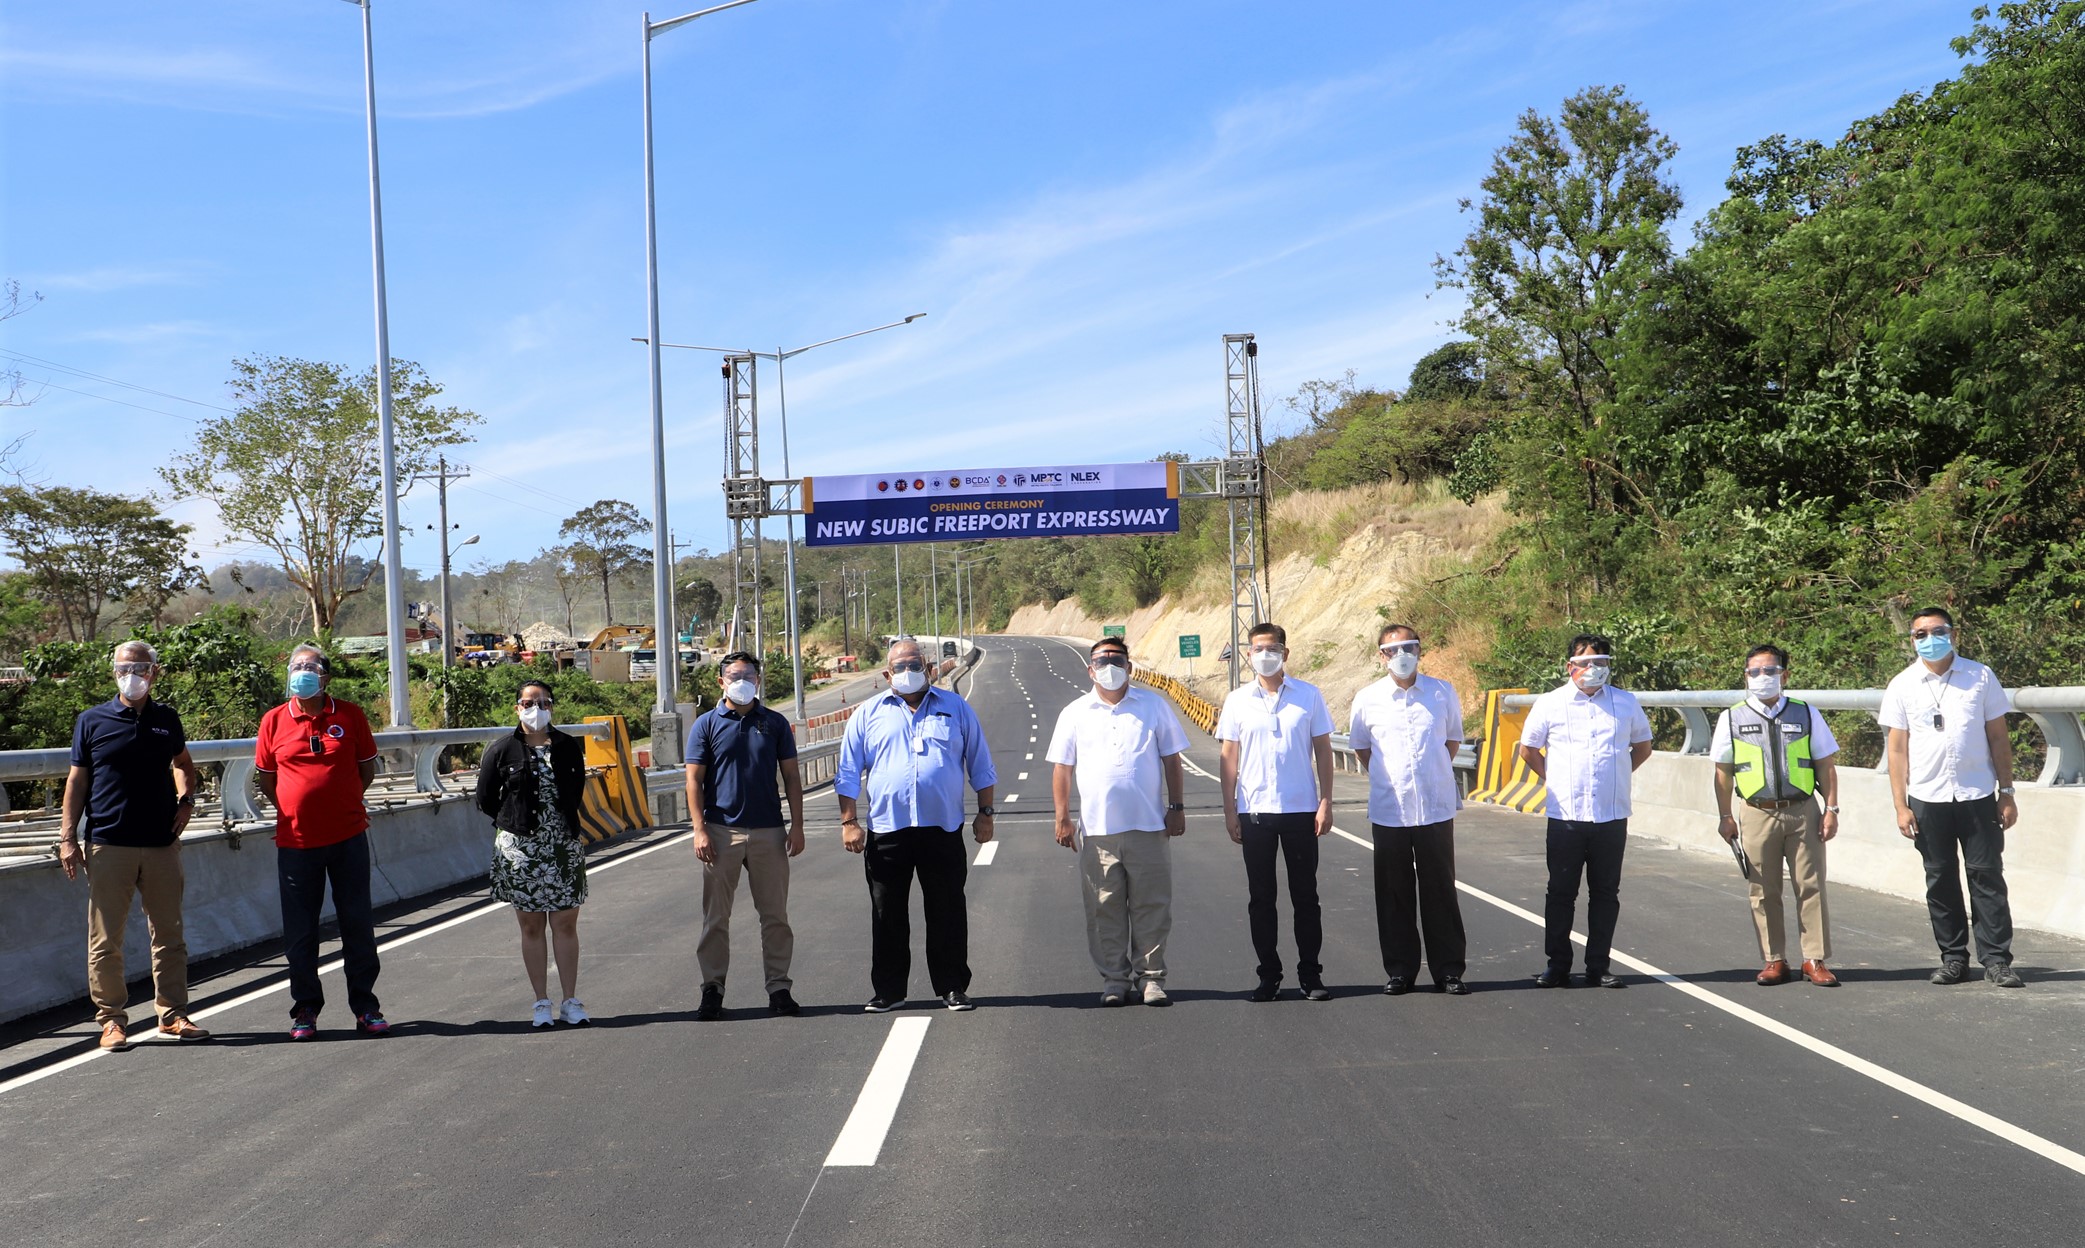 SUBIC EXPRESSWAY INAUGURATION. Top-ranking government officials led by Executive Secretary Salvador Medialdea, Public Works Secretary Mark Villar, Transportation Secretary Arthur Tugade, Presidential Spokesperson Harry Roque, and SBMA Chairman Wilma Eisma headlined the opening of the newly completed 8.2-km Subic Freeport Expressway (SFEX) on Friday, Feb. 19.